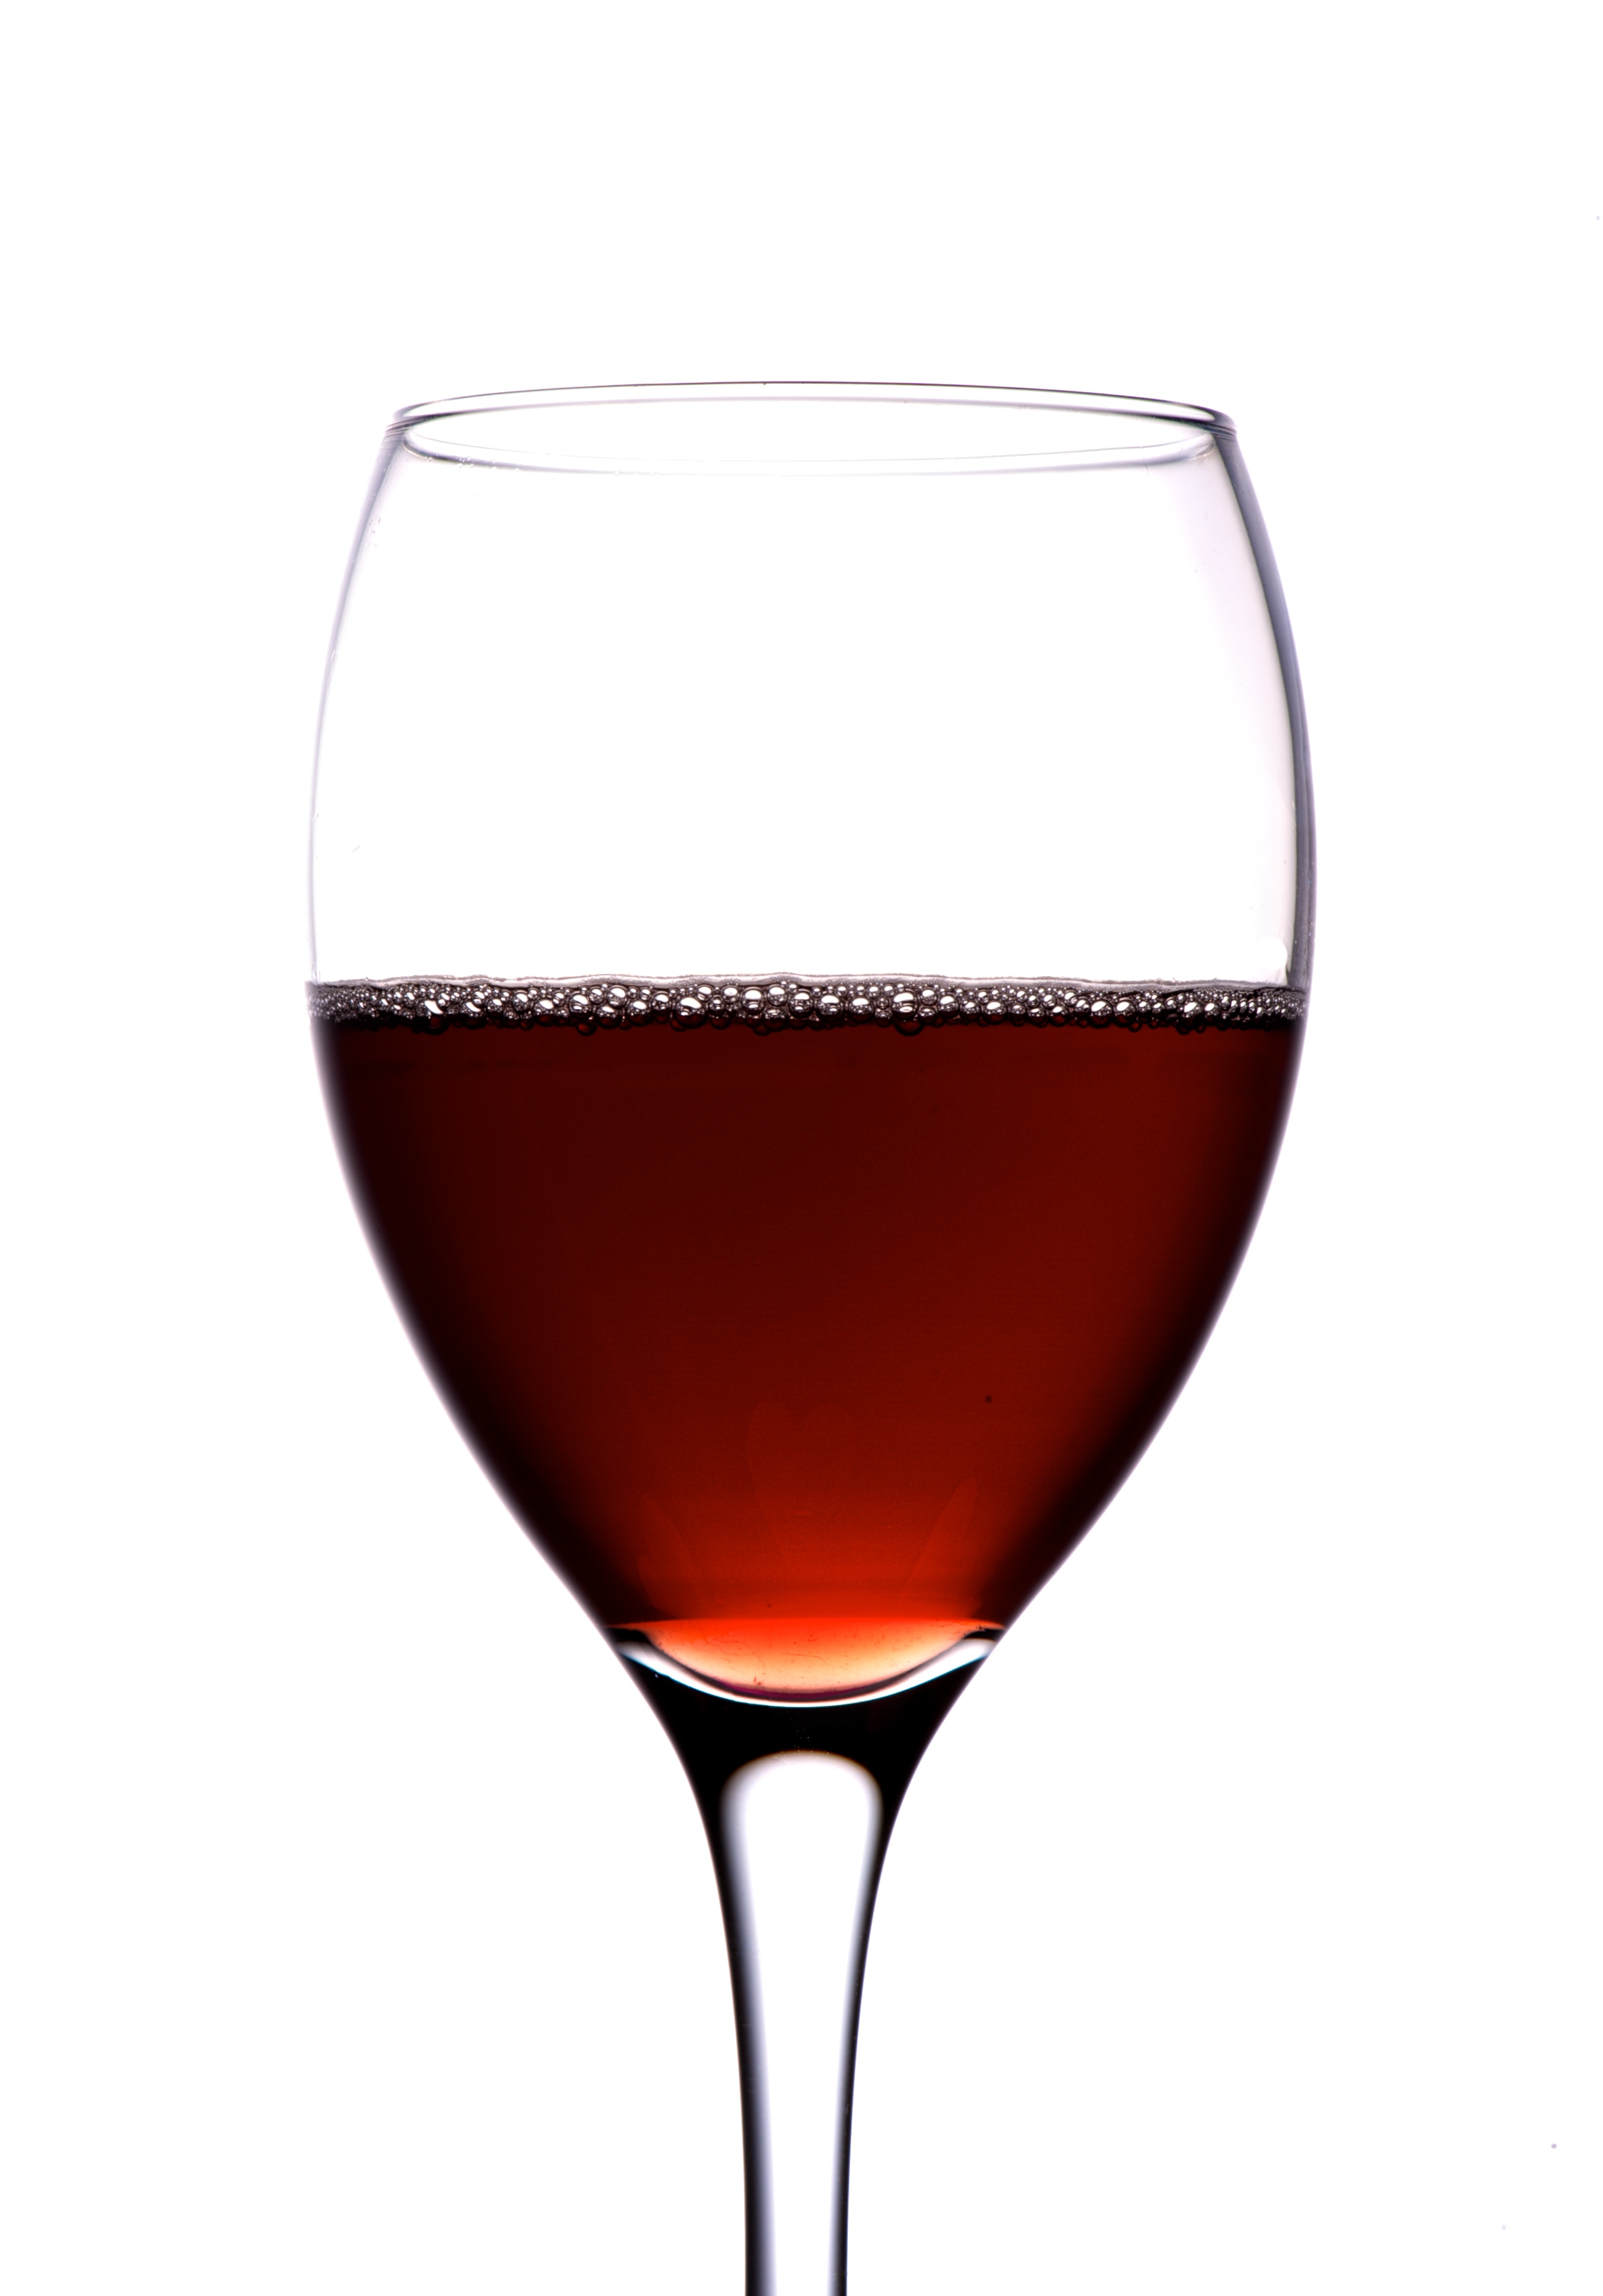 File:A glass of red wine.jpg - Wikimedia Commons